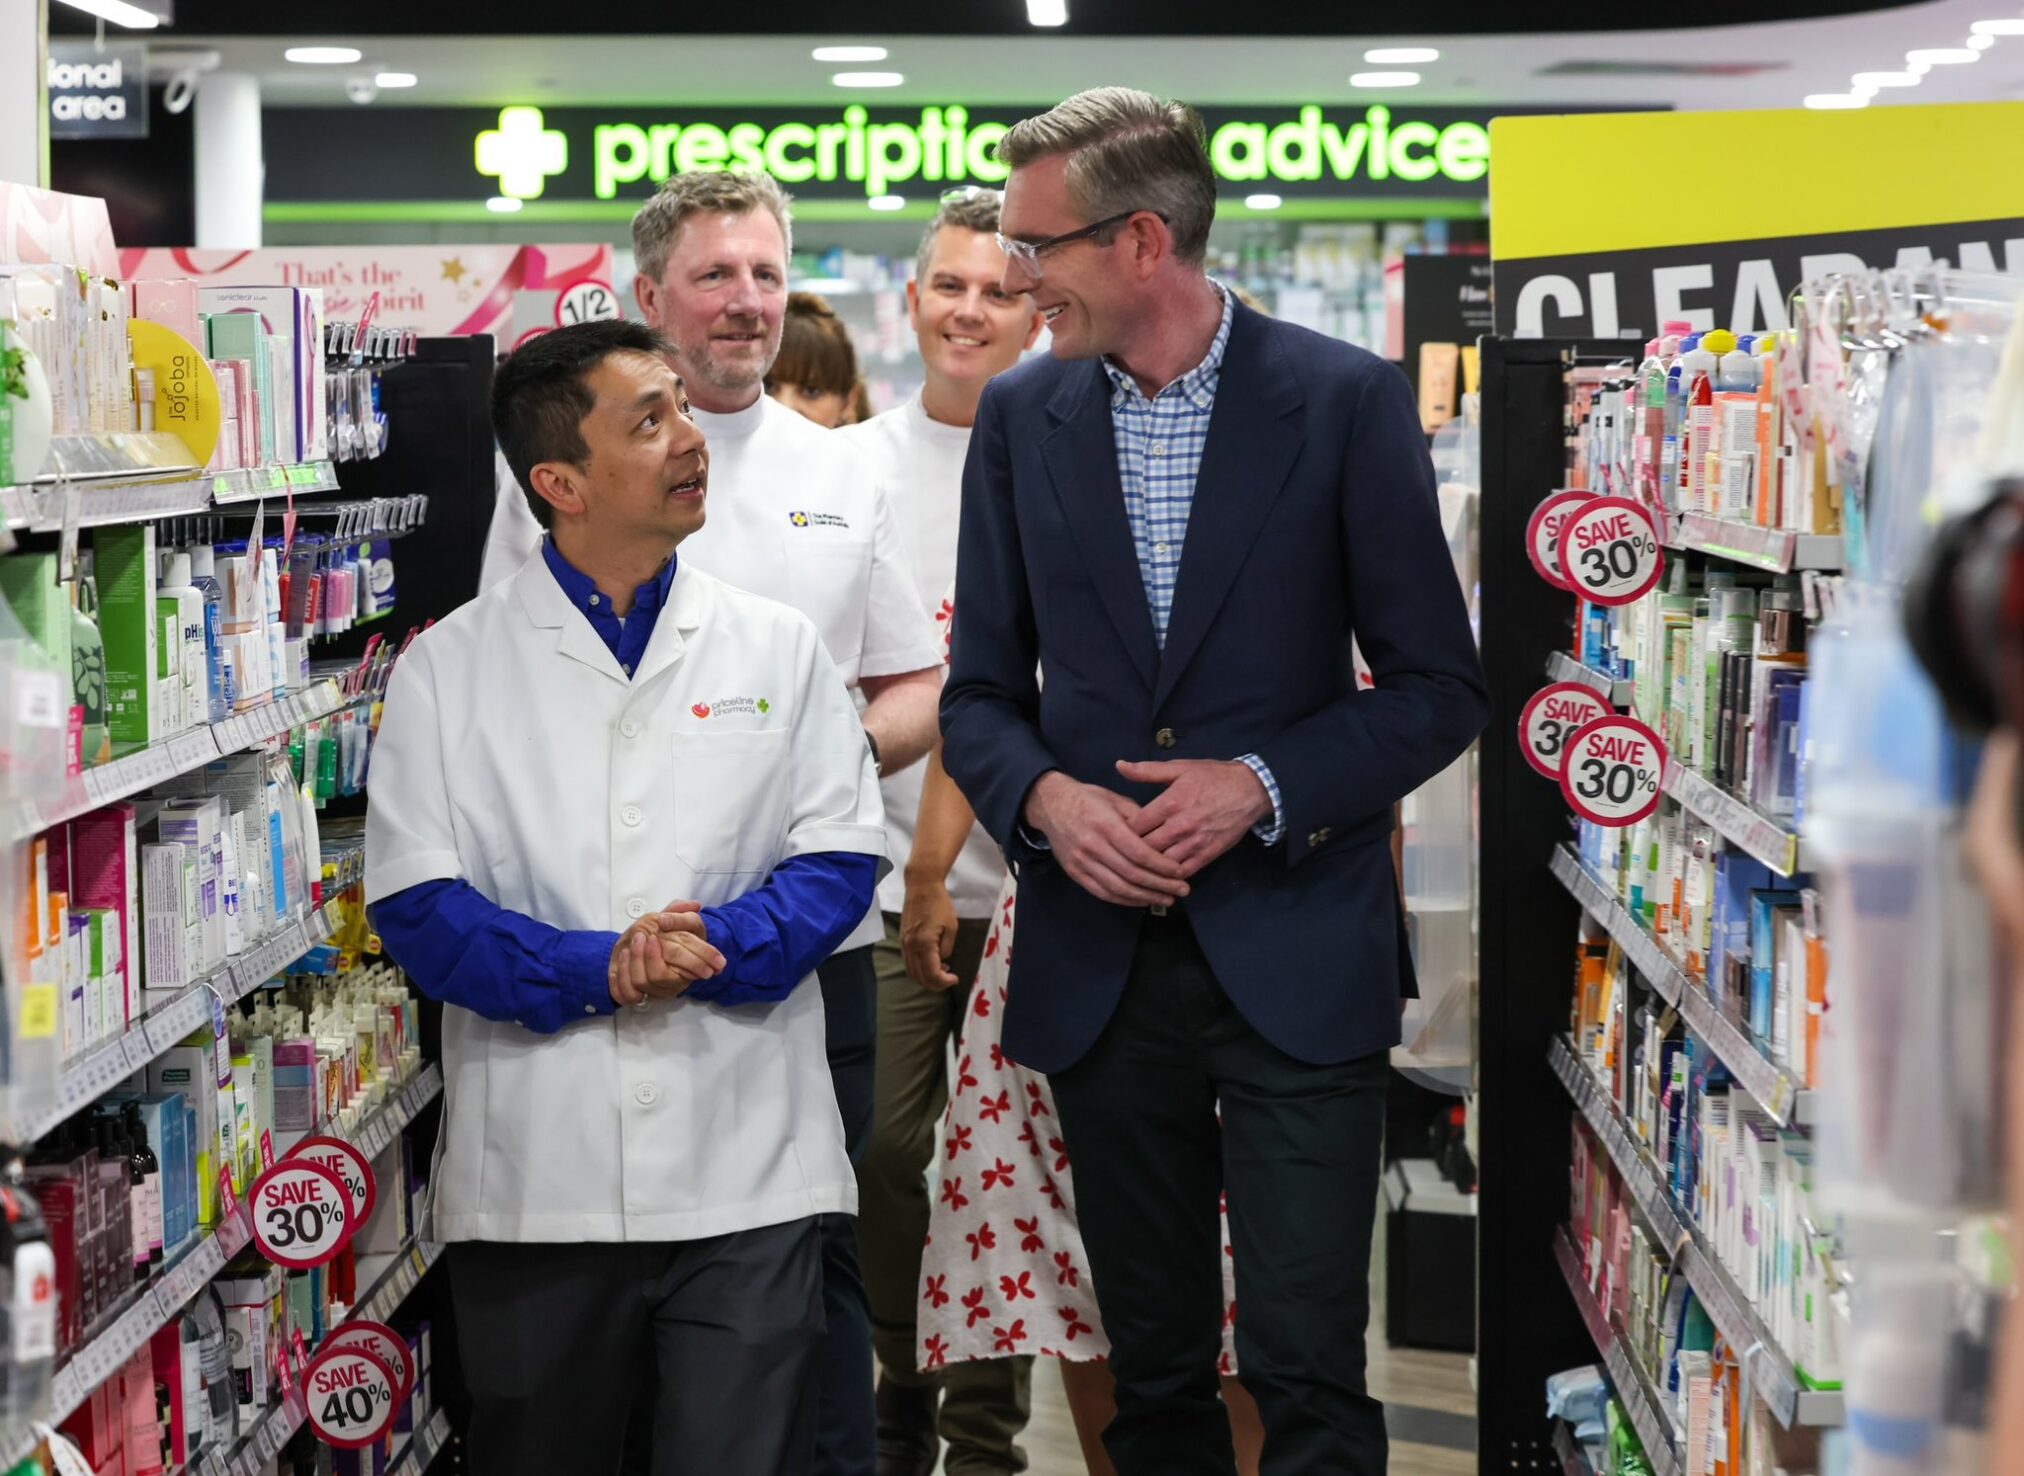 NSW premier Dominic Perrottet in a pharmacy surrounded by shelves, talking to pharmacists